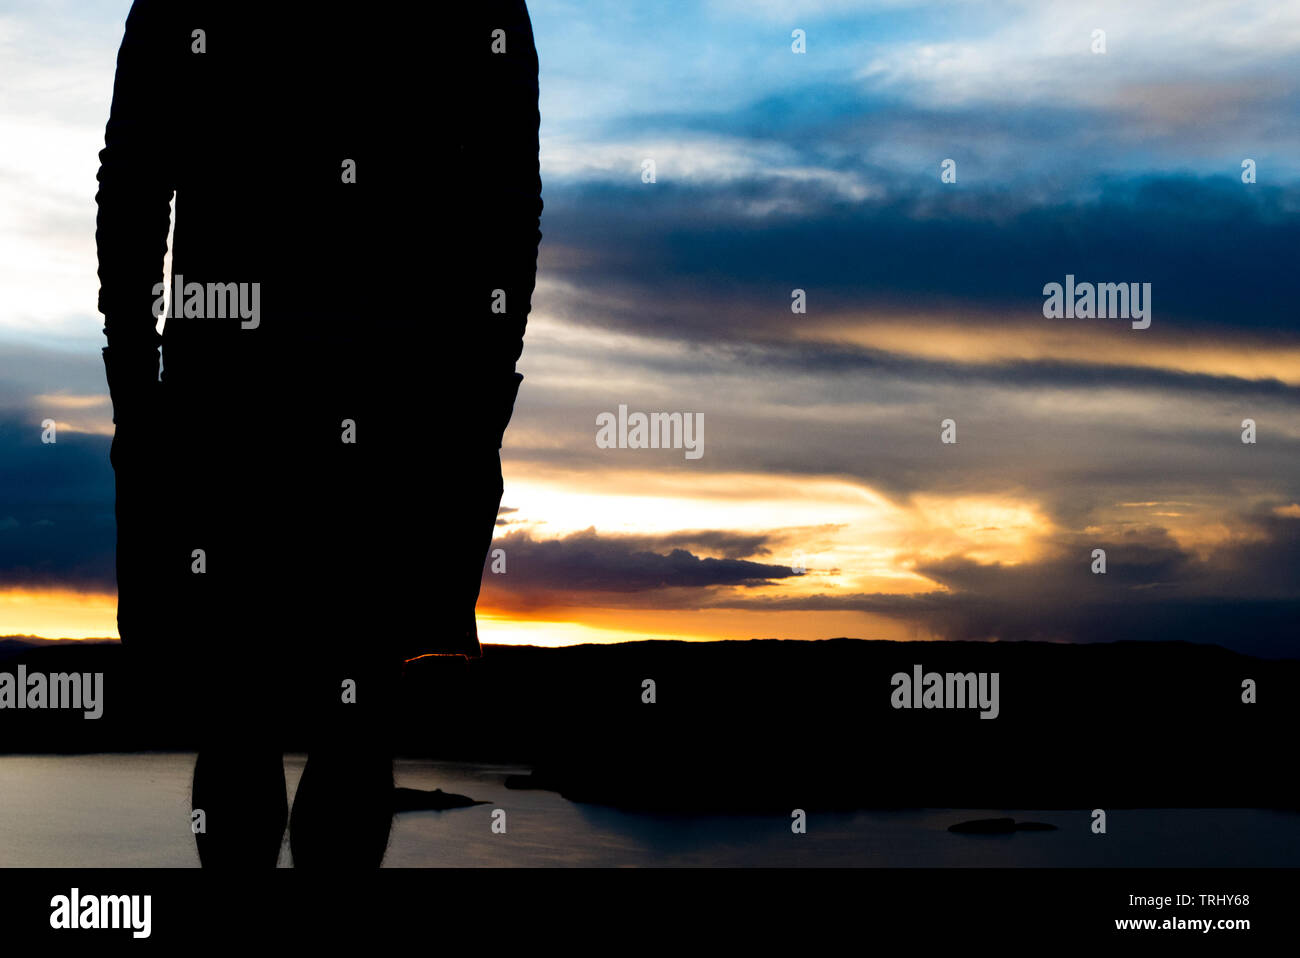 Silhouette of man overlooking mountains and water at sunset Stock Photo